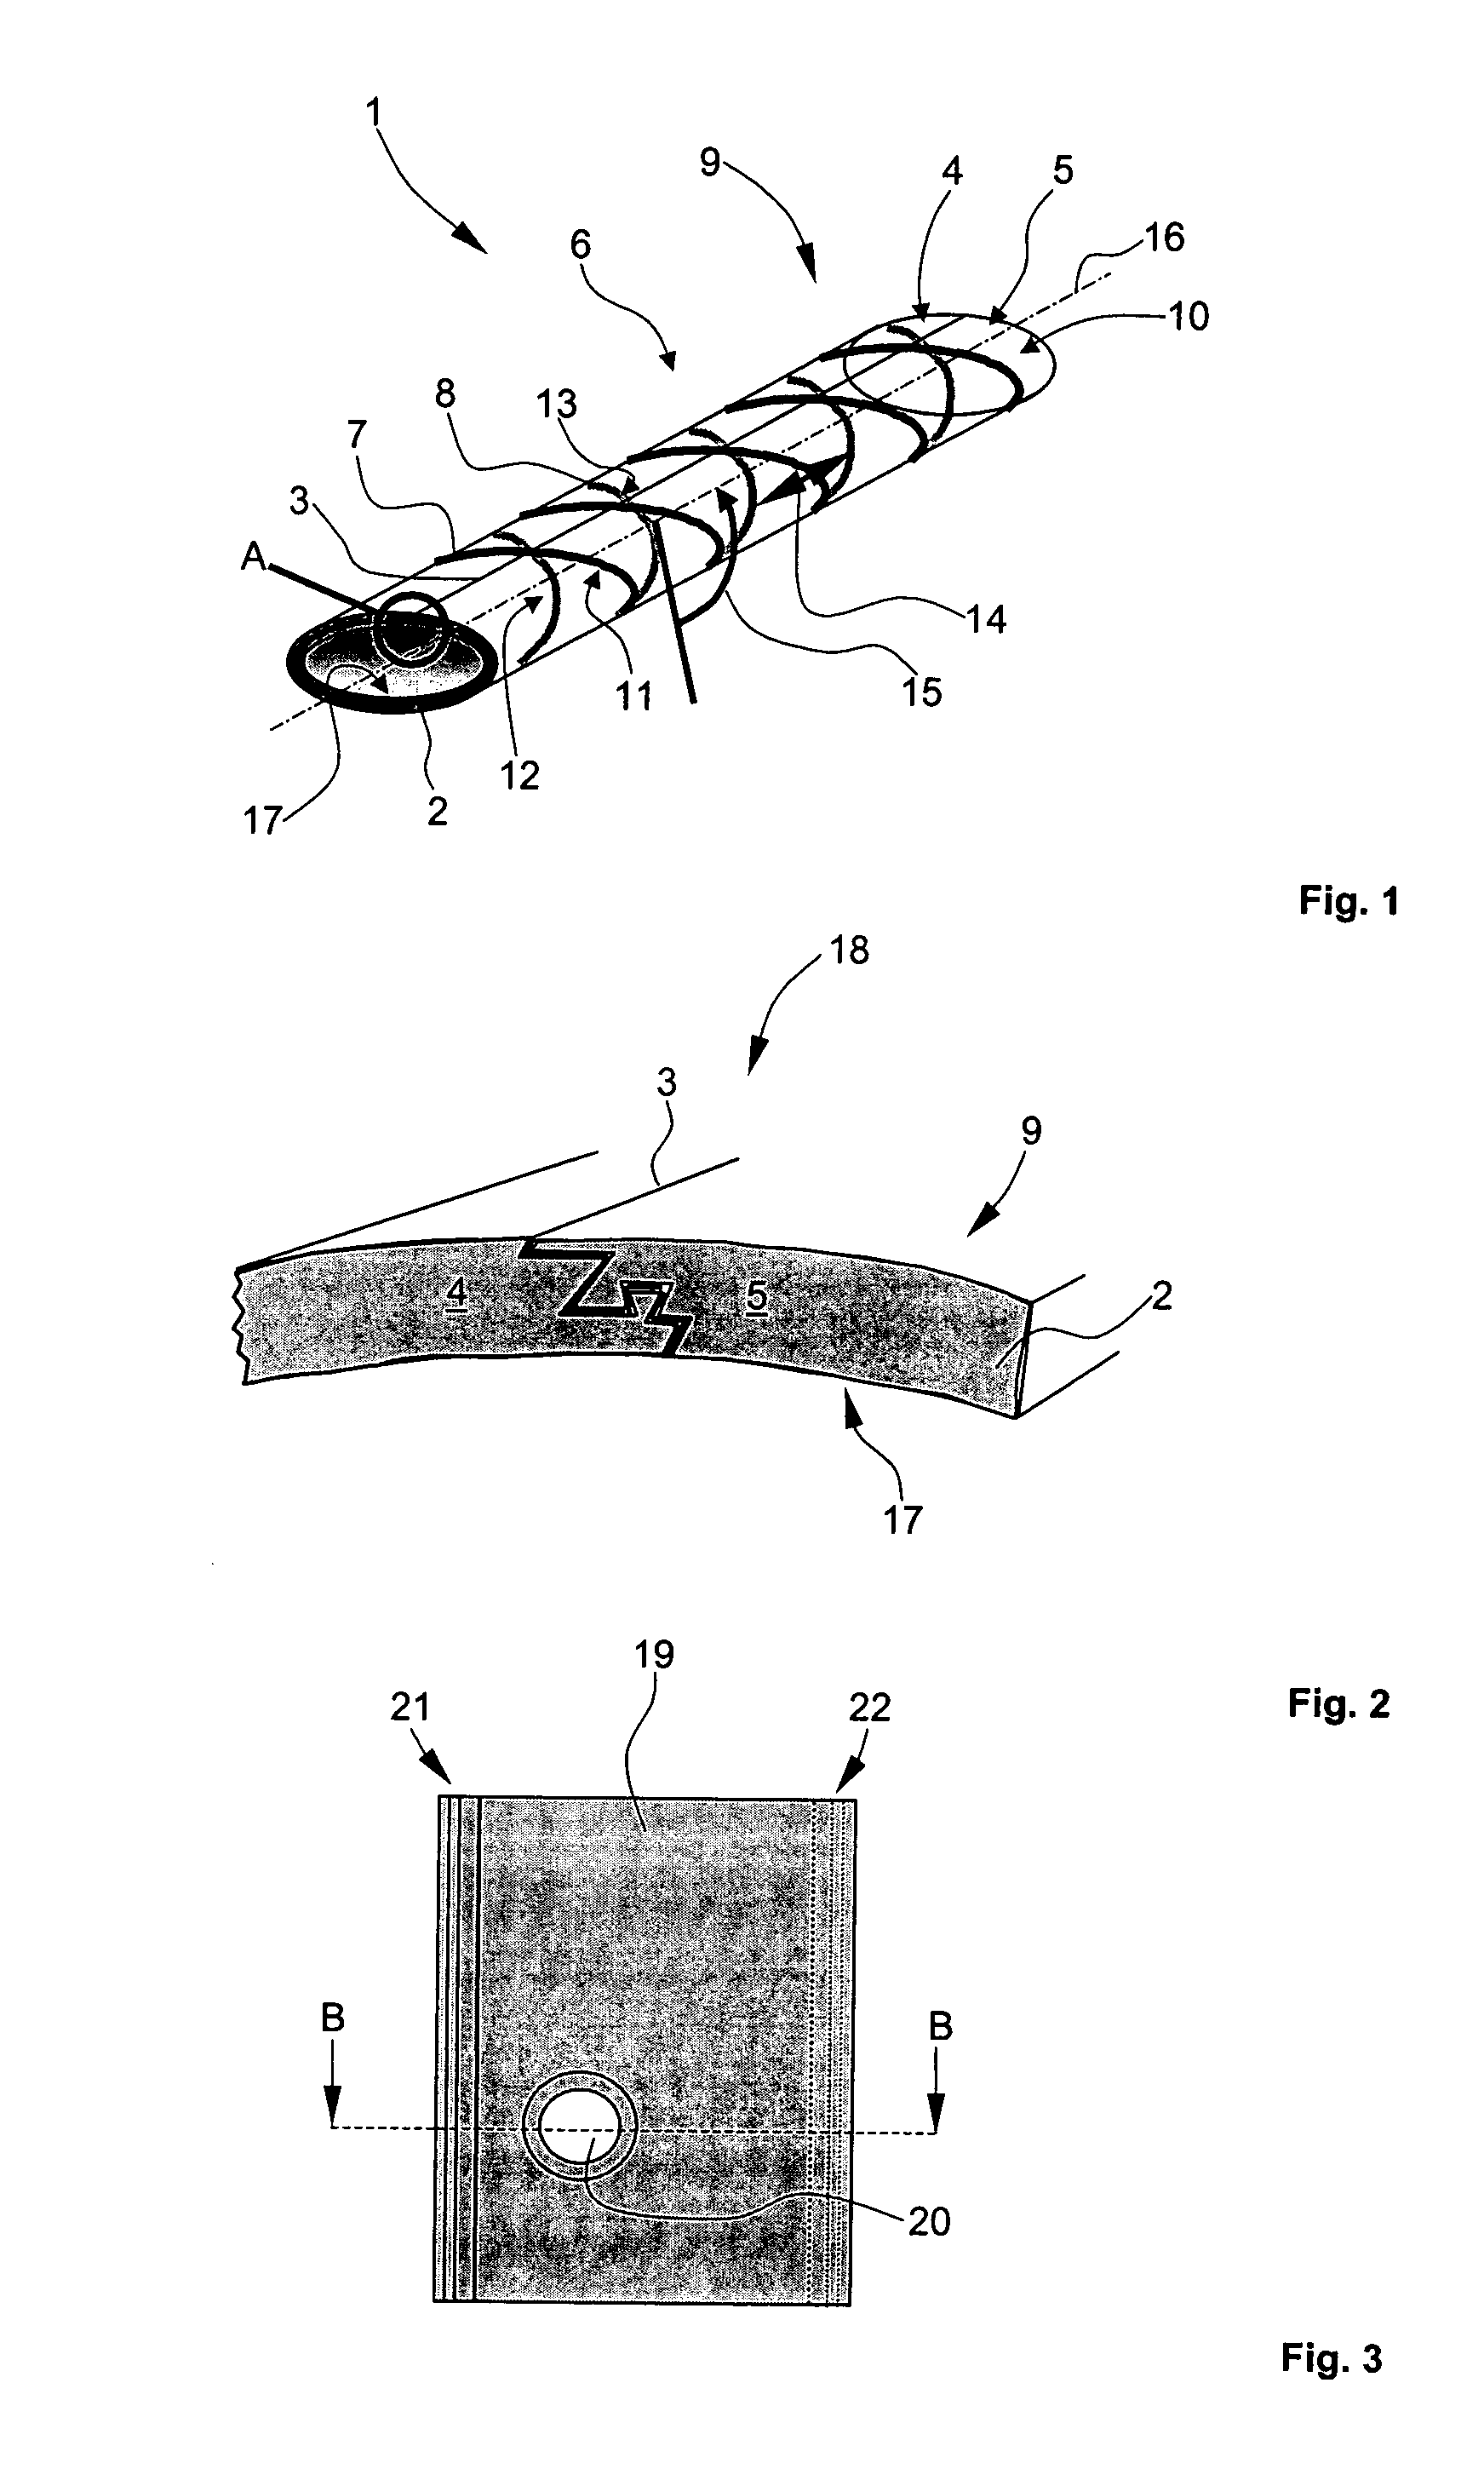 Pipeline for conducting air for air conditioning in aircrafts